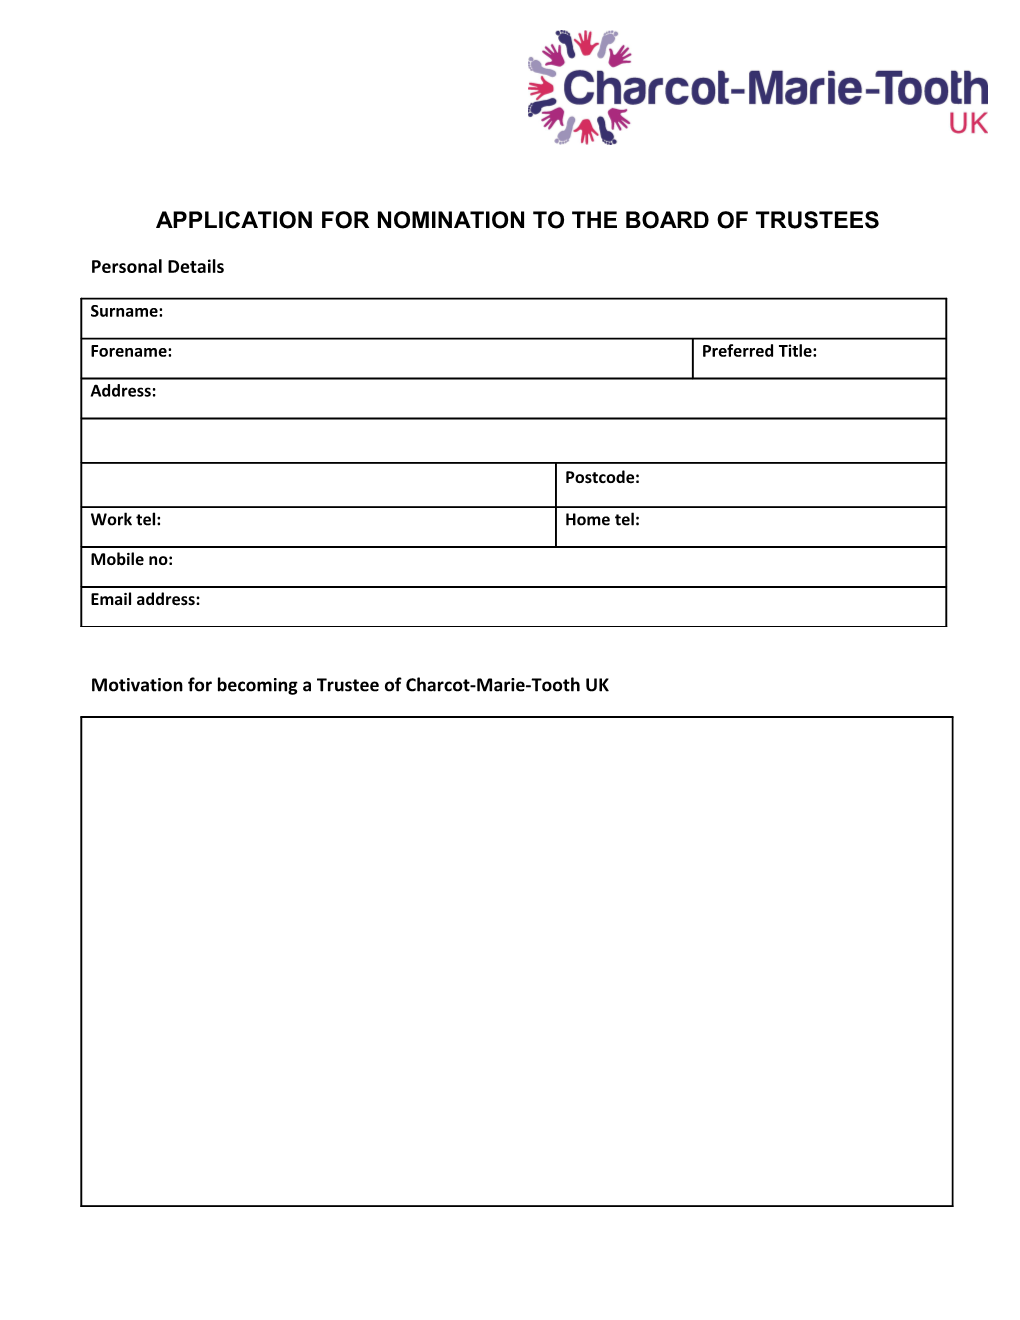 Application Fornomination to the Board of Trustees